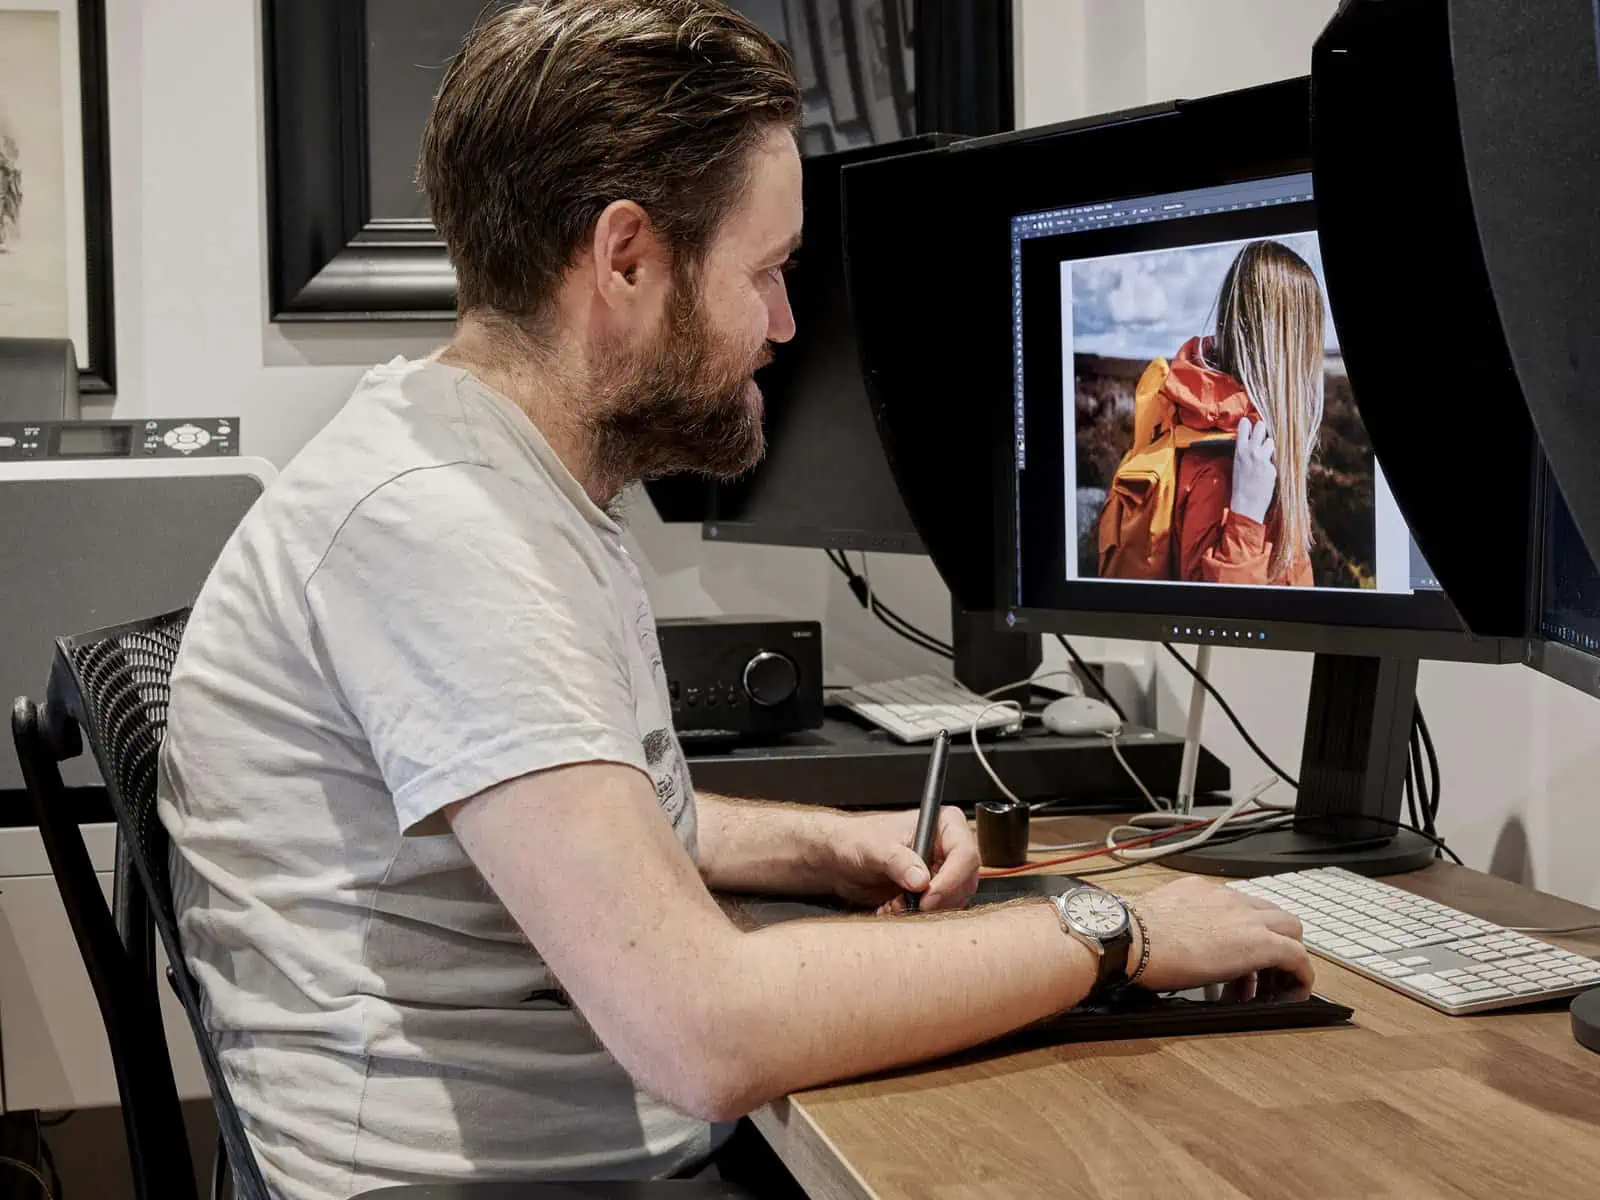 ID: A landscape image. Matt is sat at his desk working on an image at the computer. He is seen from the side. He is wearing a white tshirt.